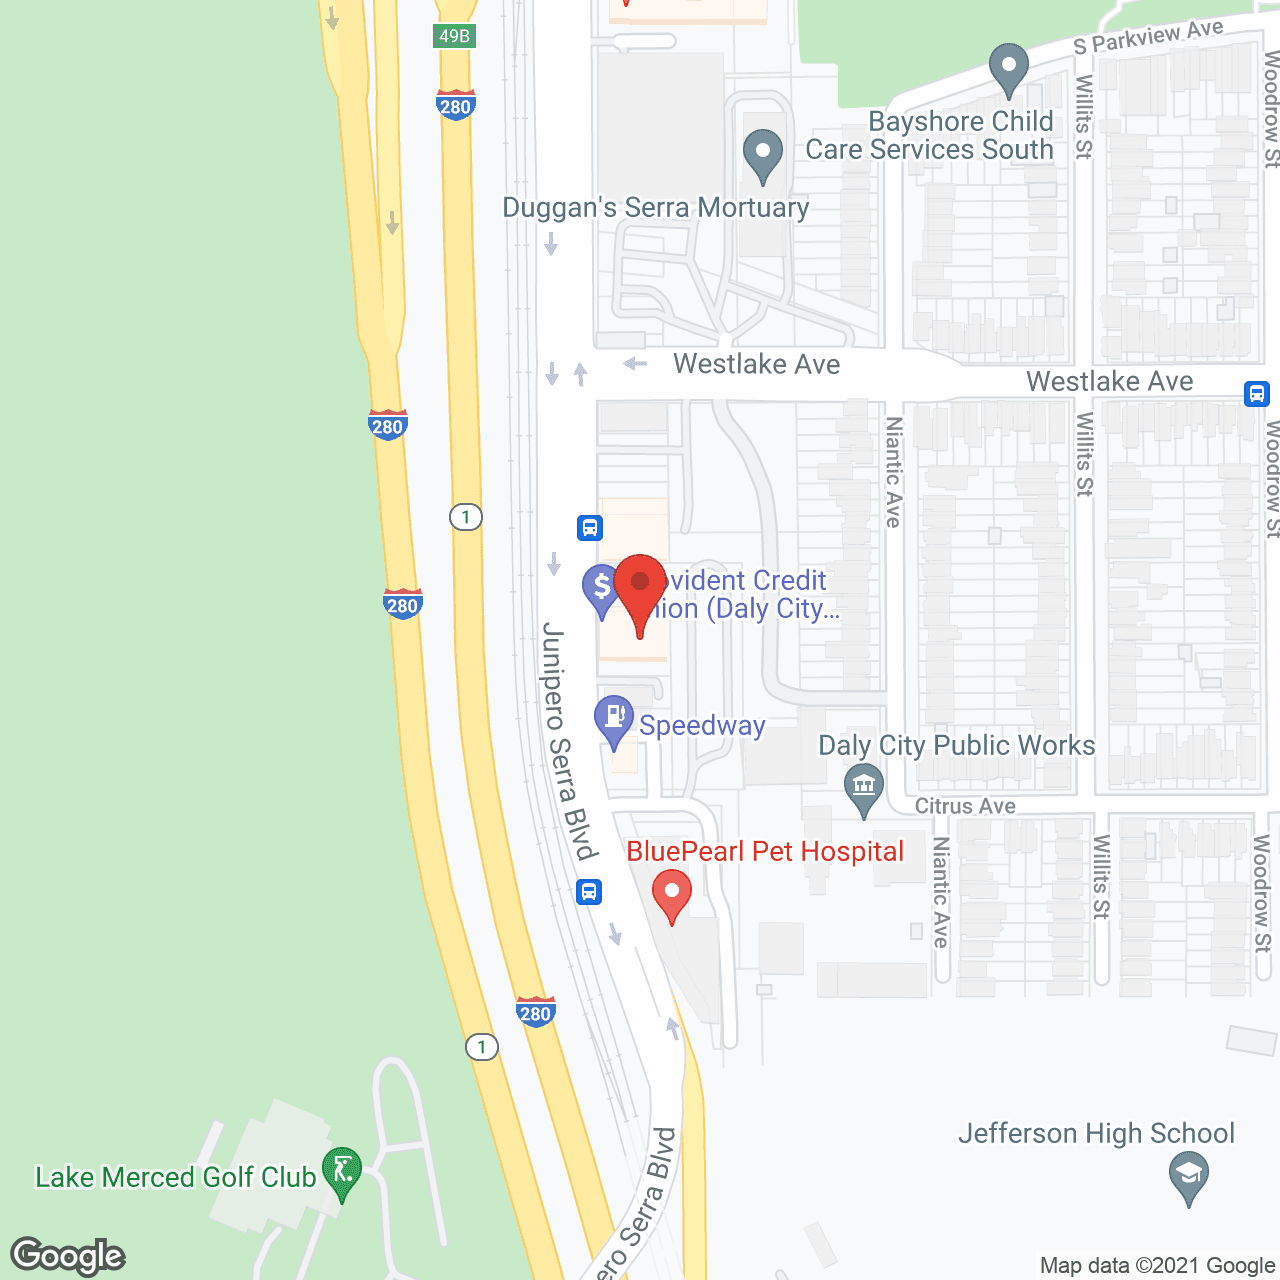 Accent Care in google map